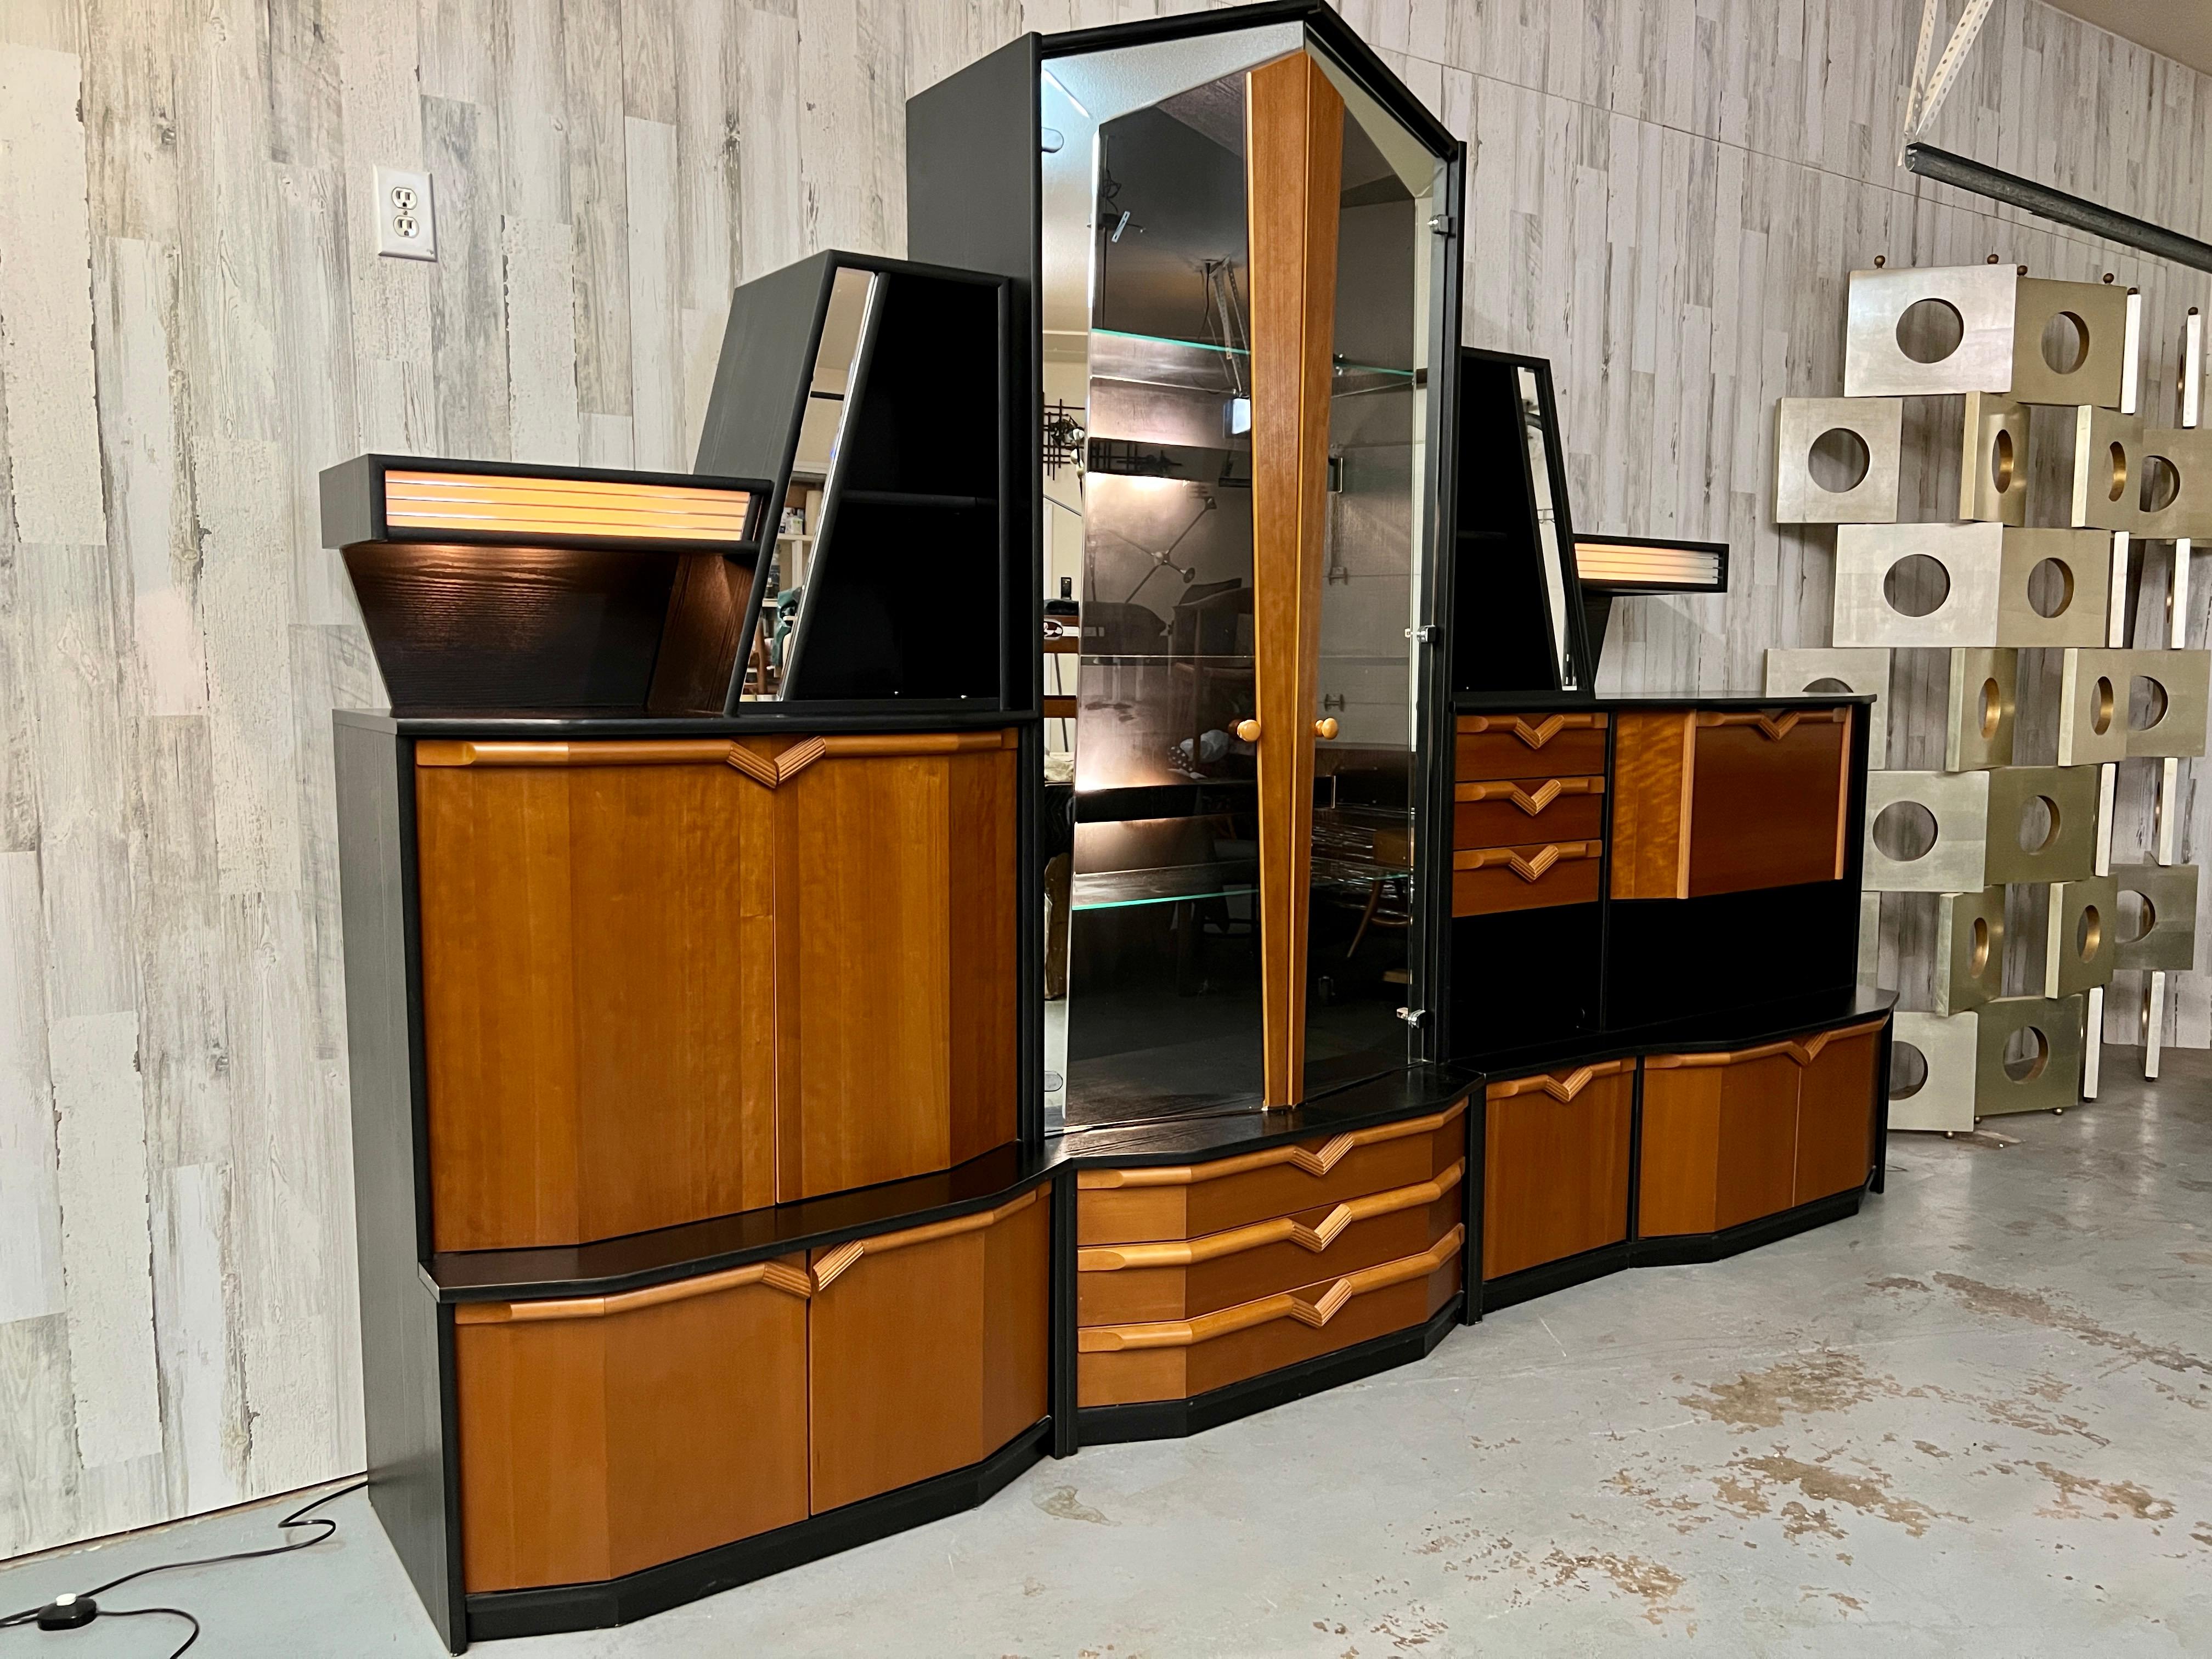 Combination of ebonized oak with teak and glass make this wall unit usable as a bookcase / display cabinet or media center. The faceted arched glass doors have mirrored borders with interior lights.
This unit comes in 3 sections, The display